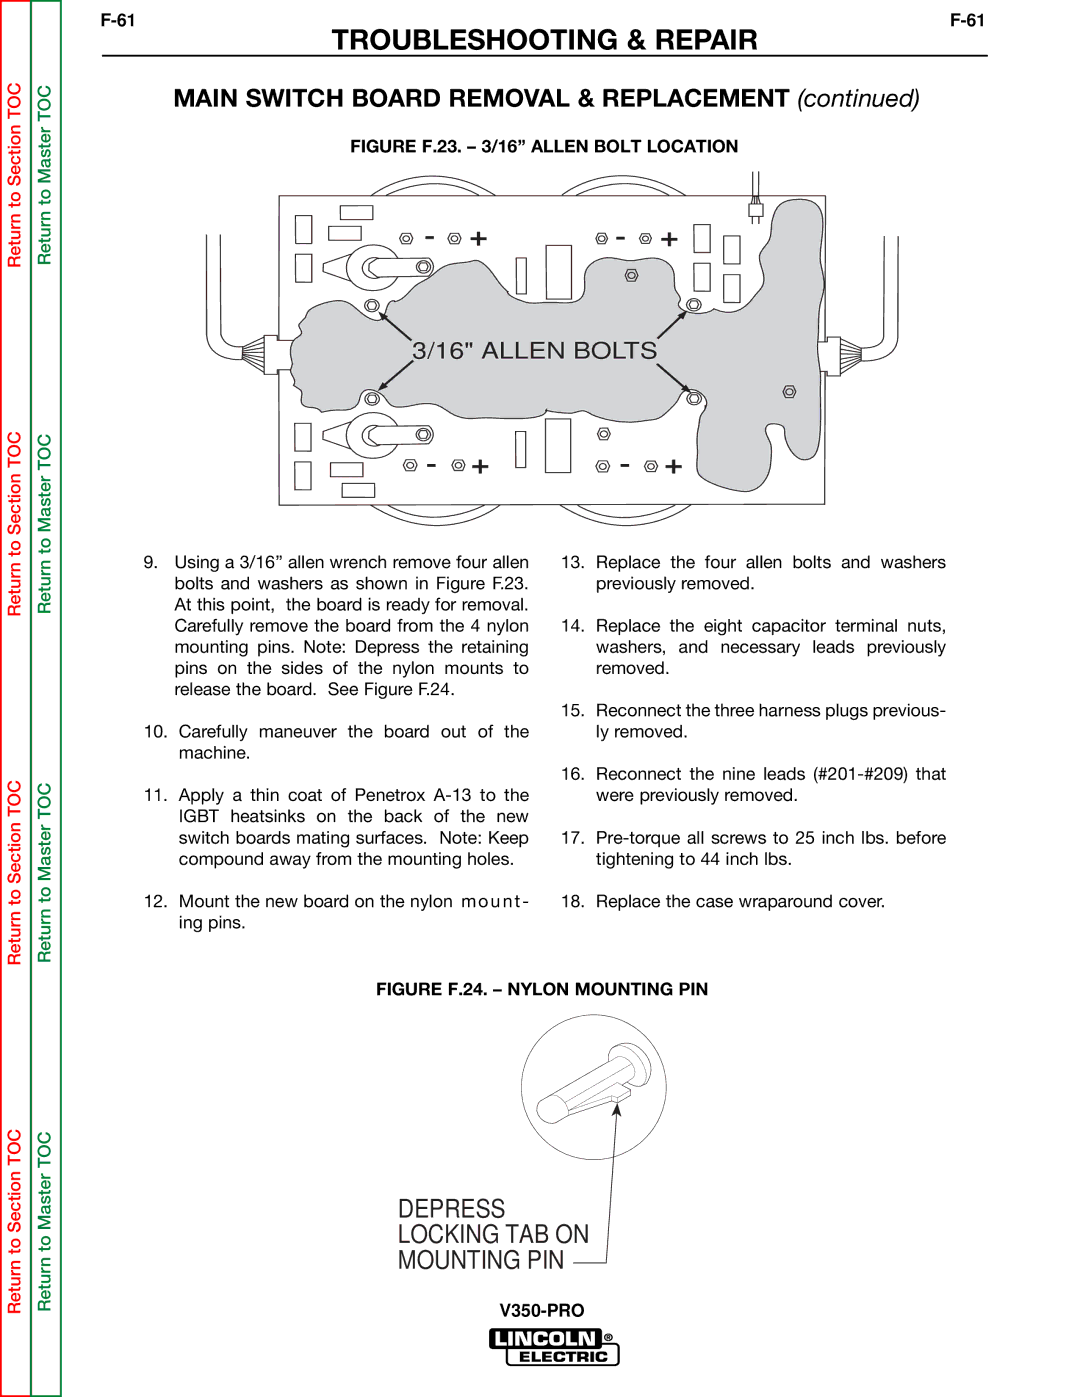 Lincoln Electric SVM158-A service manual Depress Locking TAB on Mounting PIN 